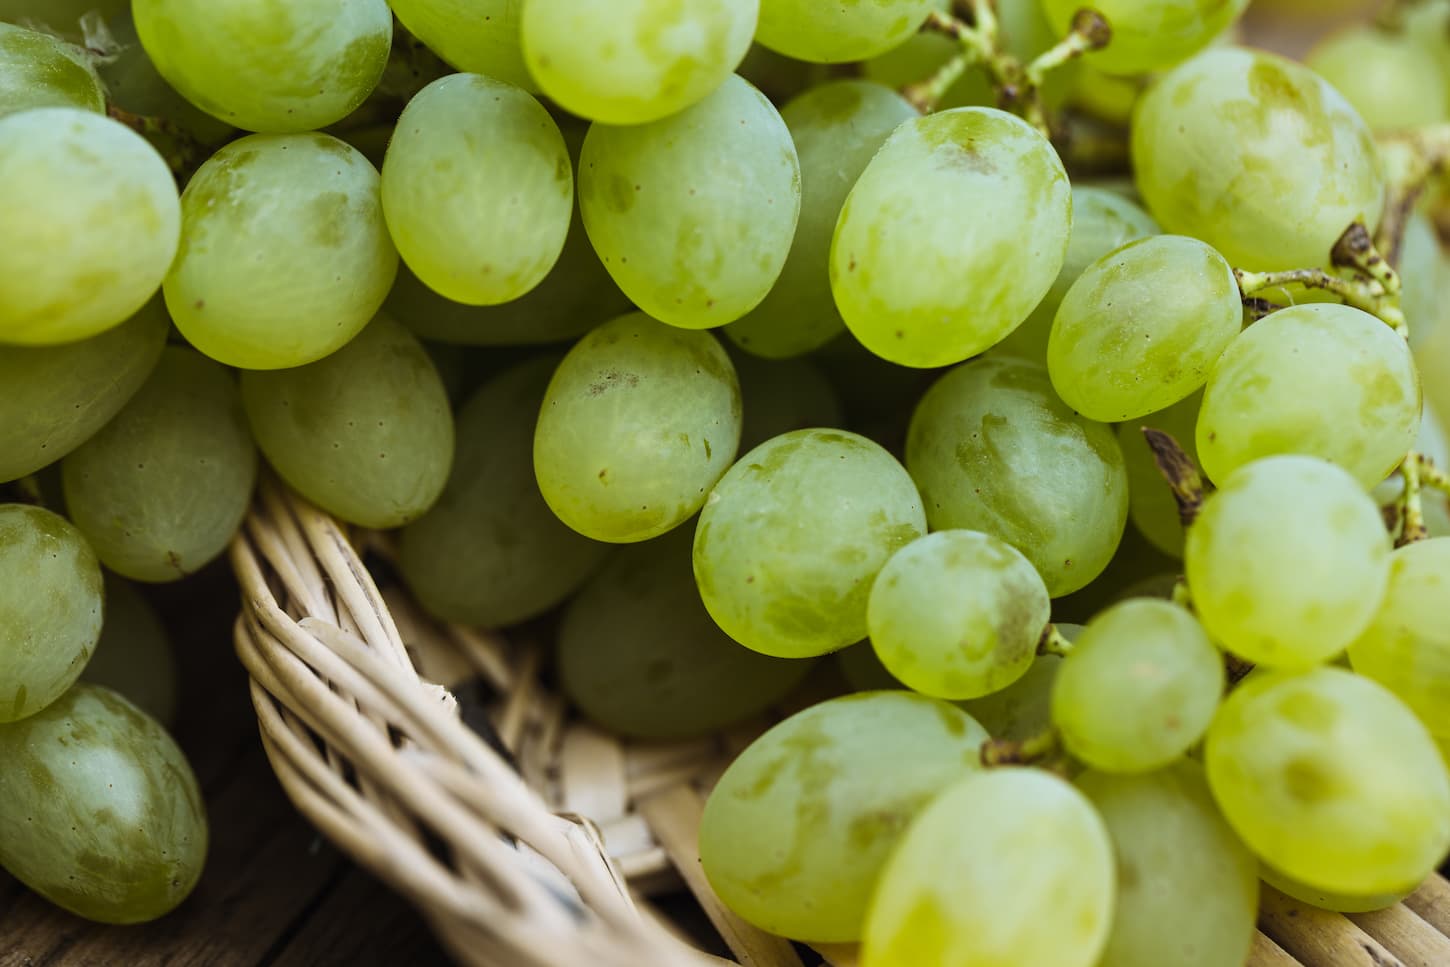 An image of ripe green grapes.